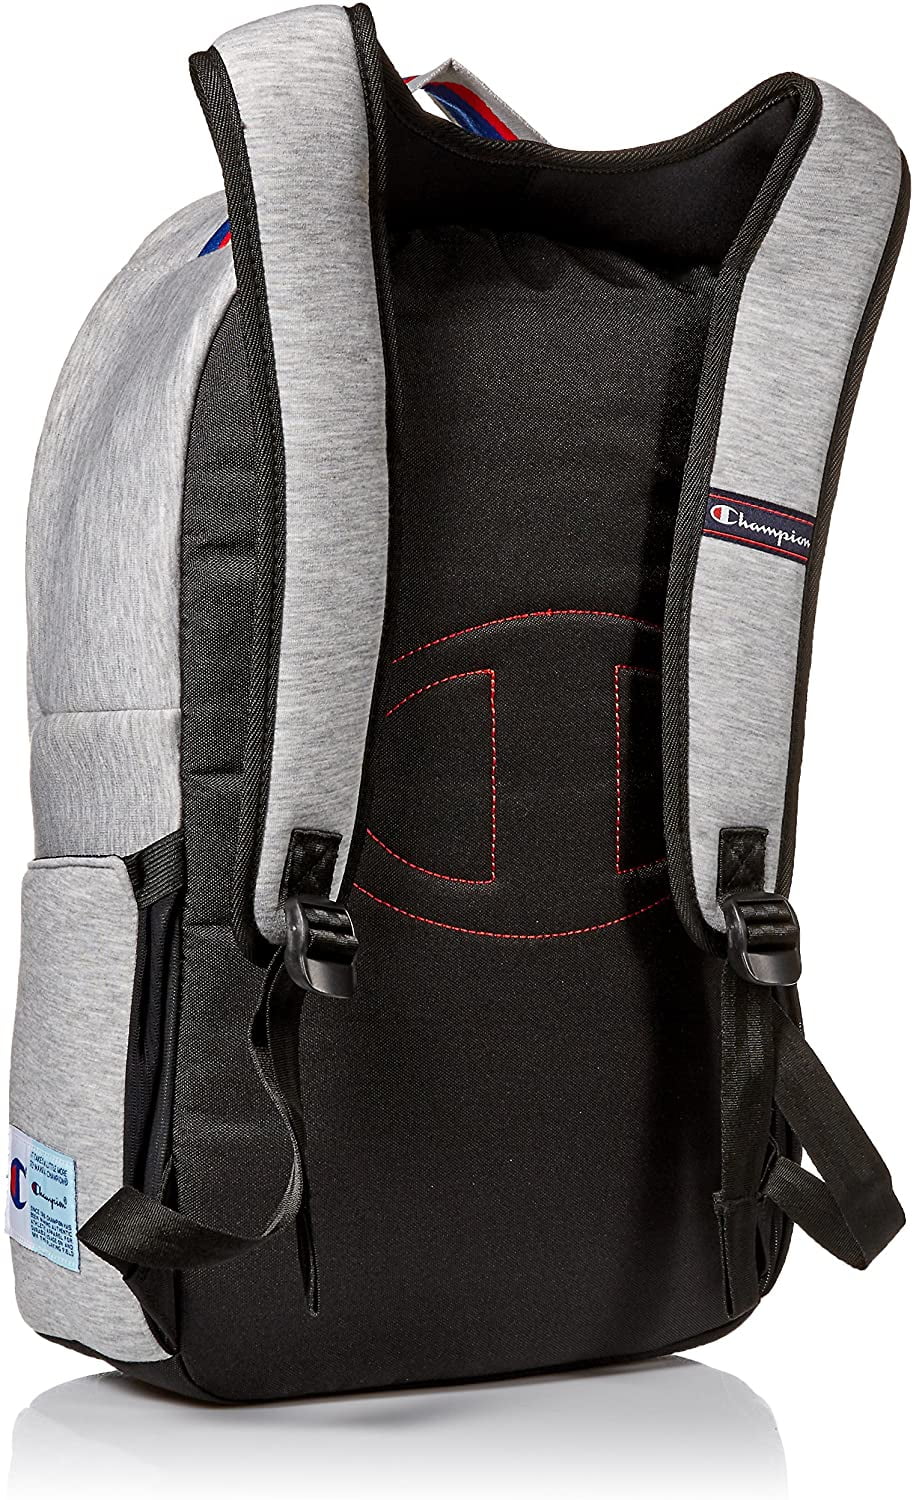 champion attribute backpack